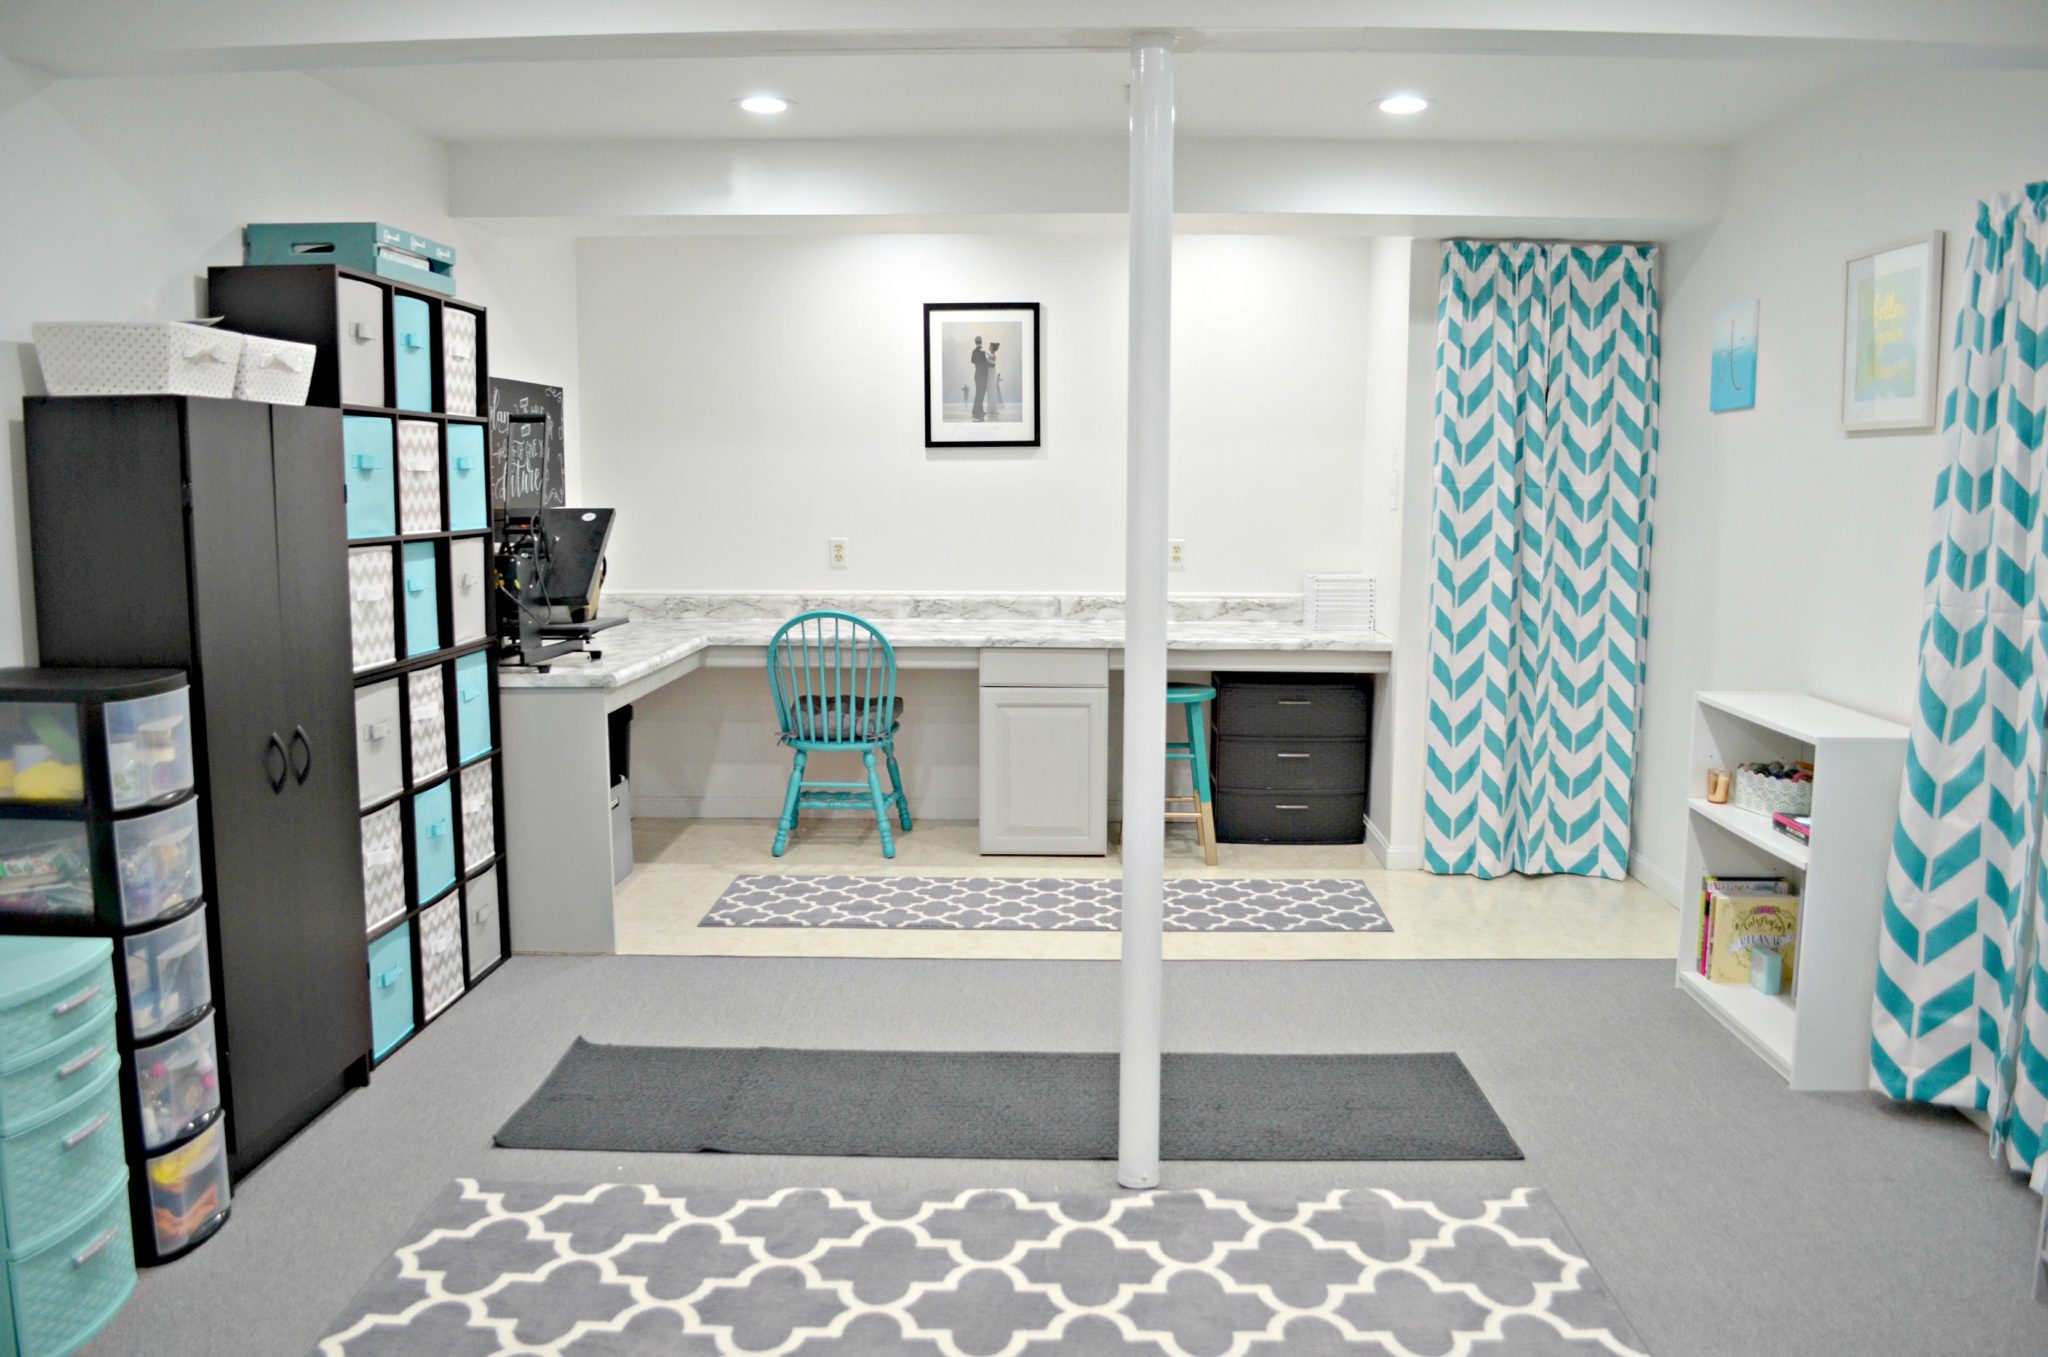 Creating Your Dream Craft Room